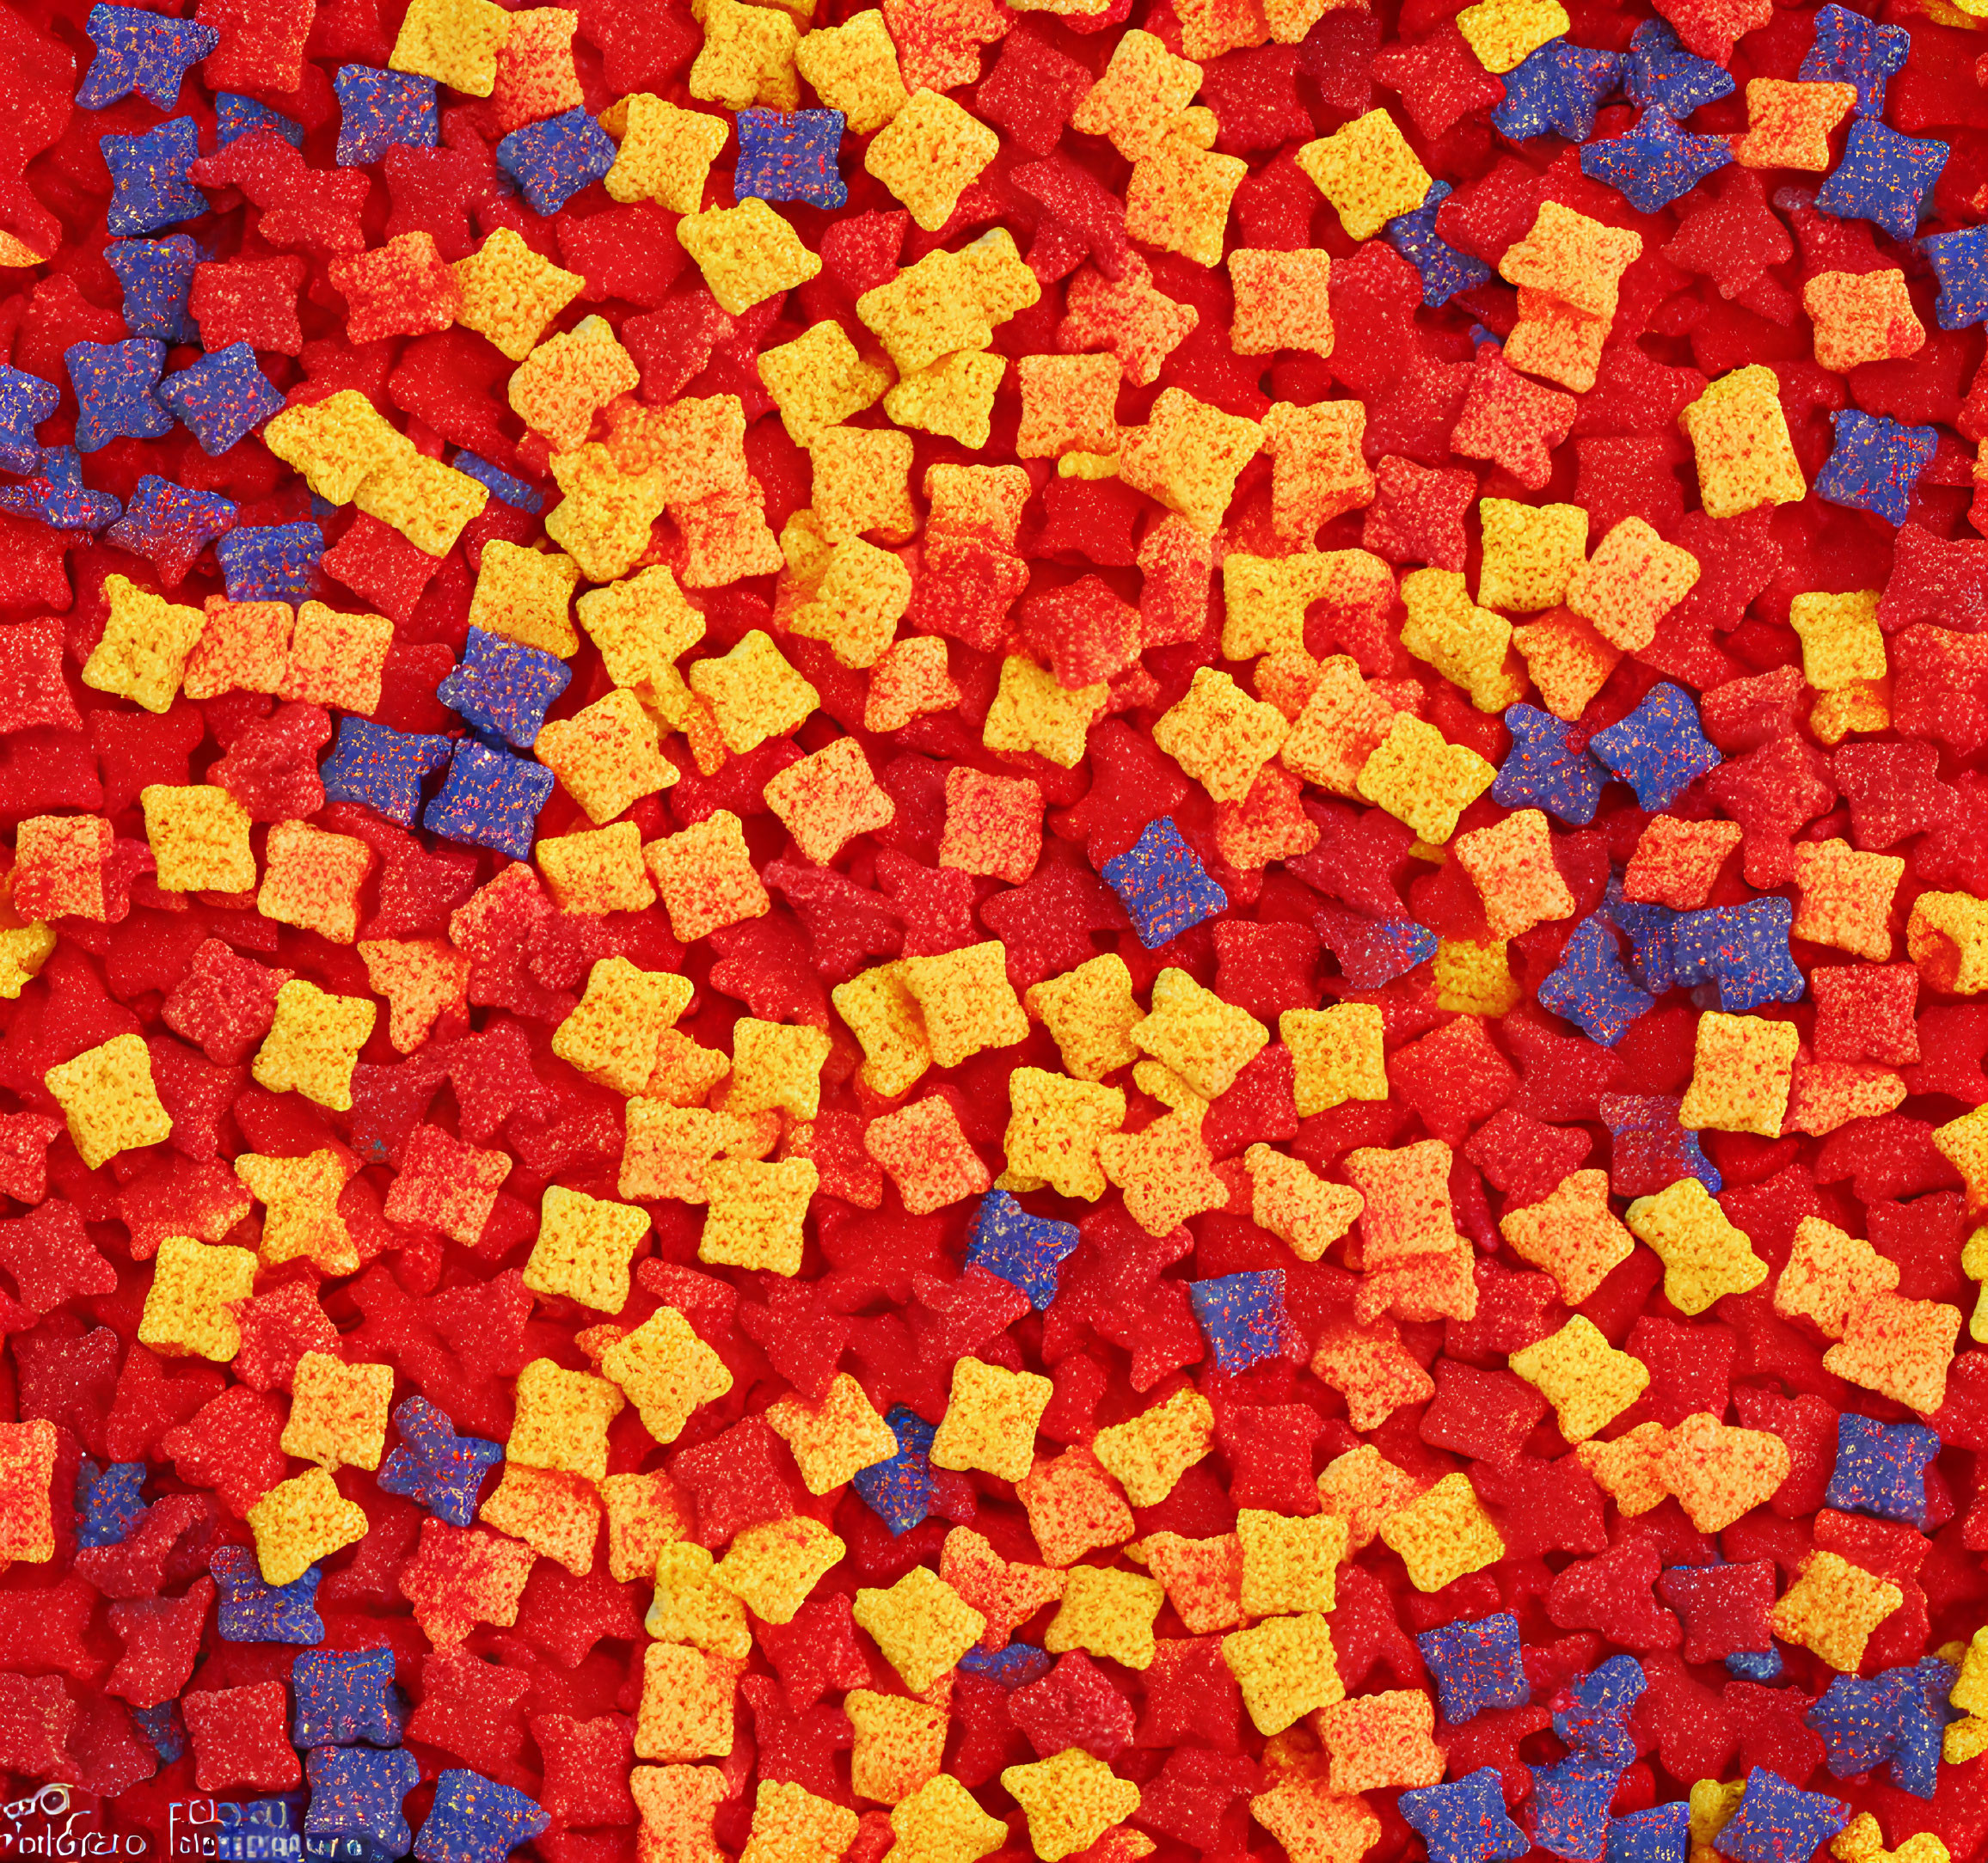 Colorful Close-Up of Red, Yellow, and Blue Foam Particles